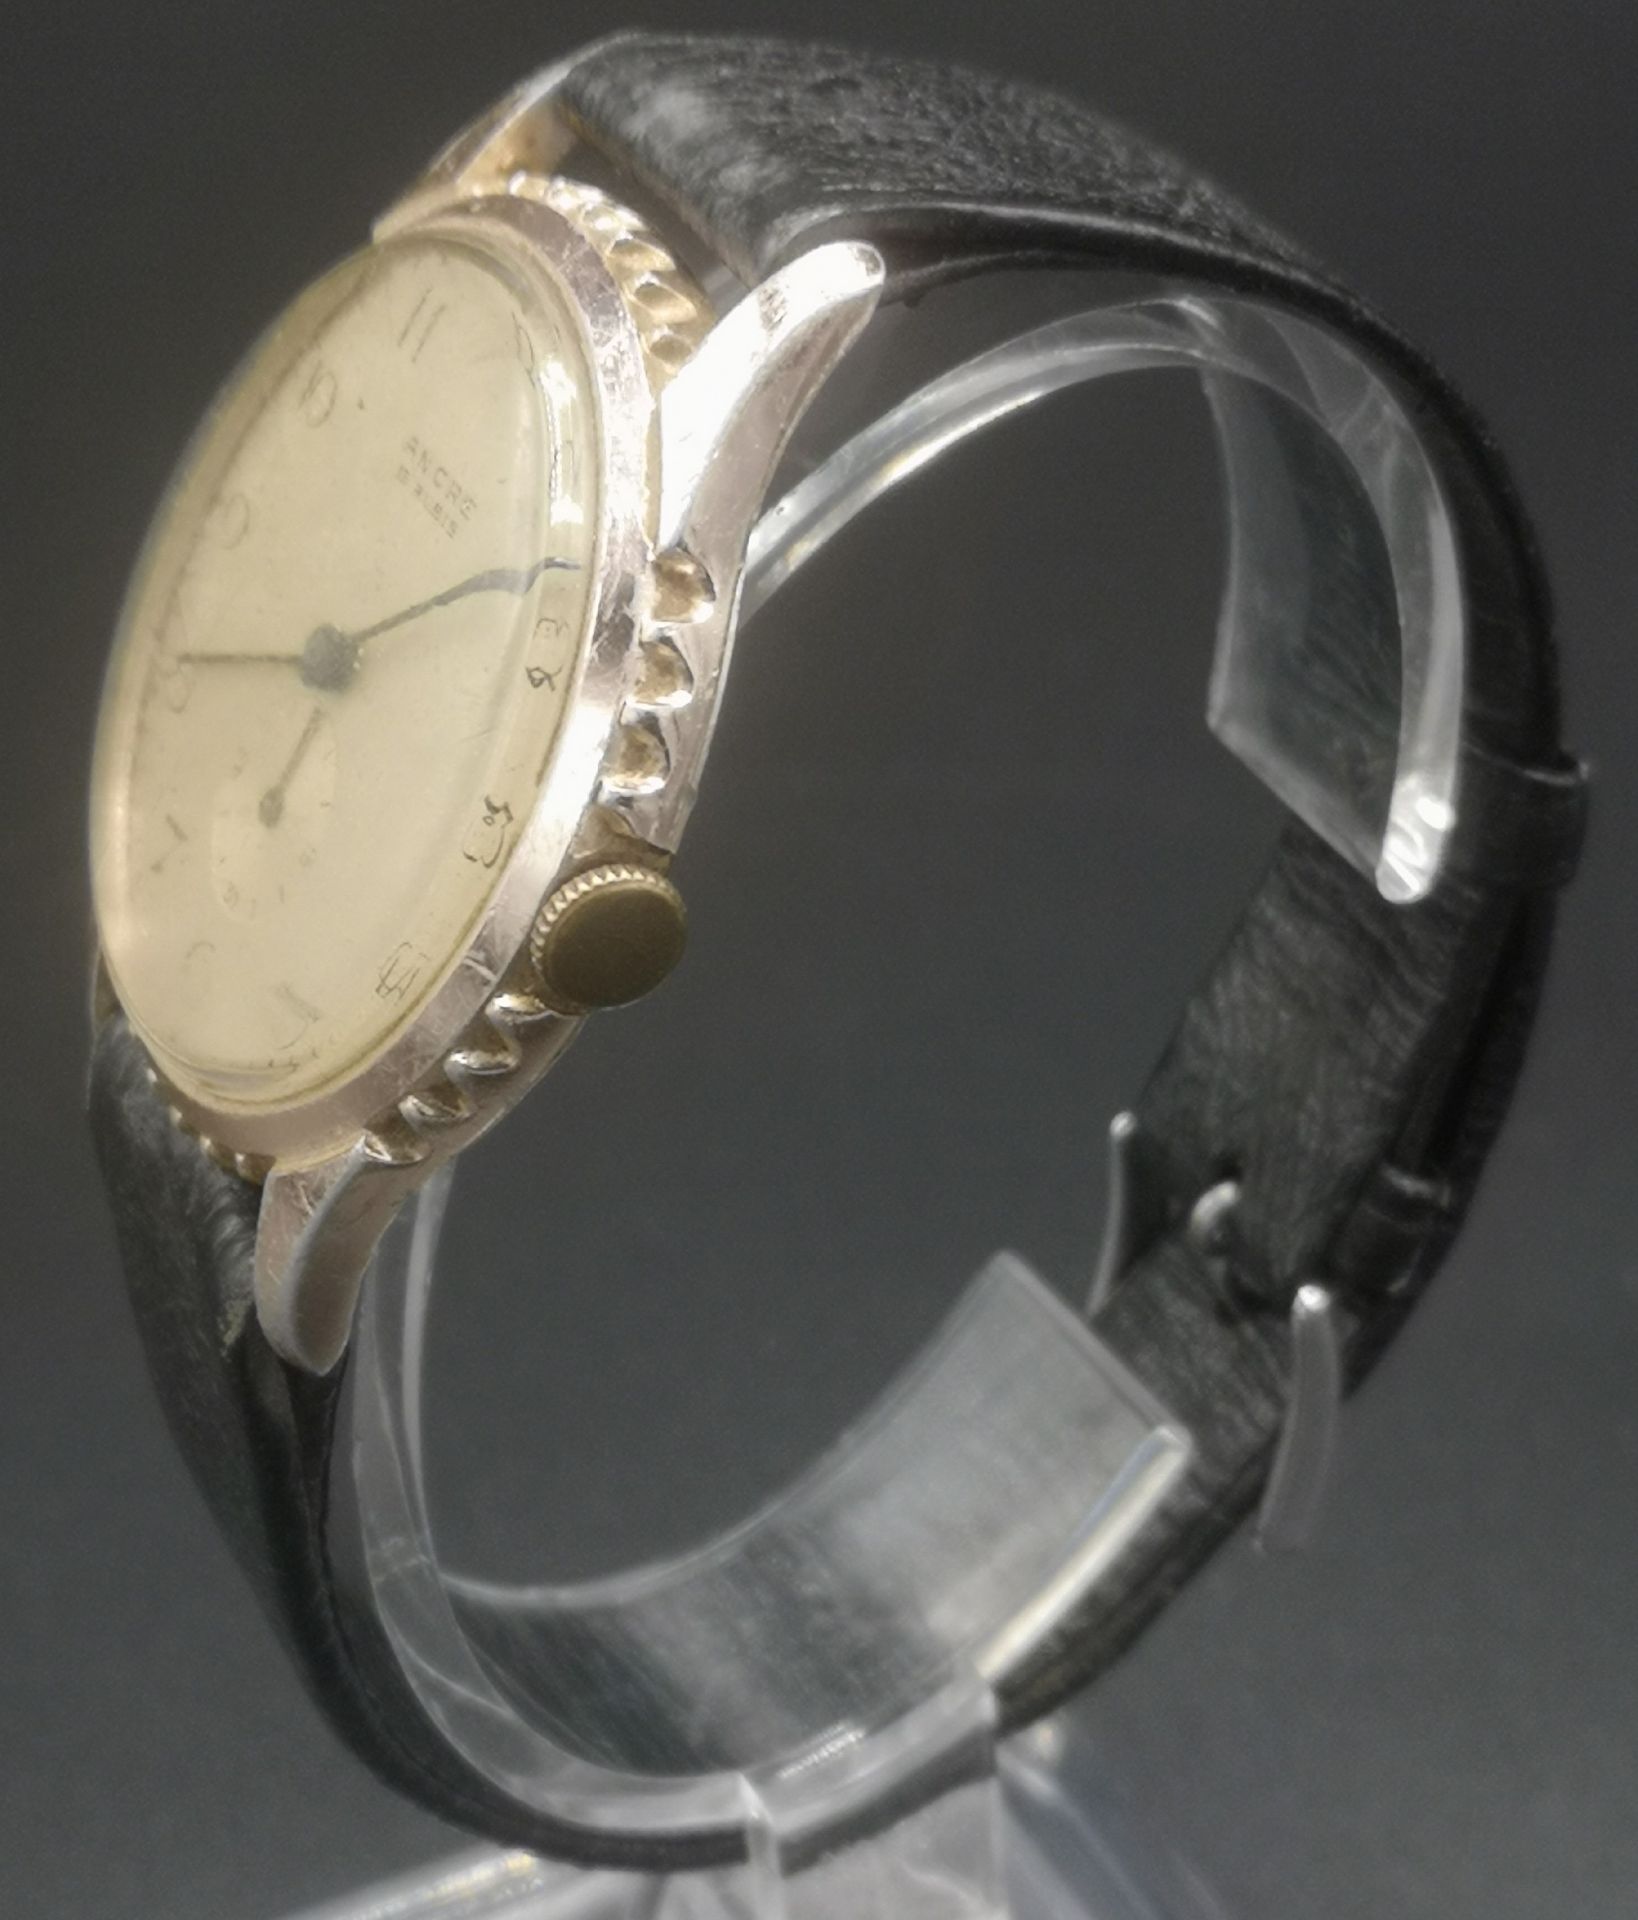 Gents wrist watch in 9ct gold case - Image 3 of 9